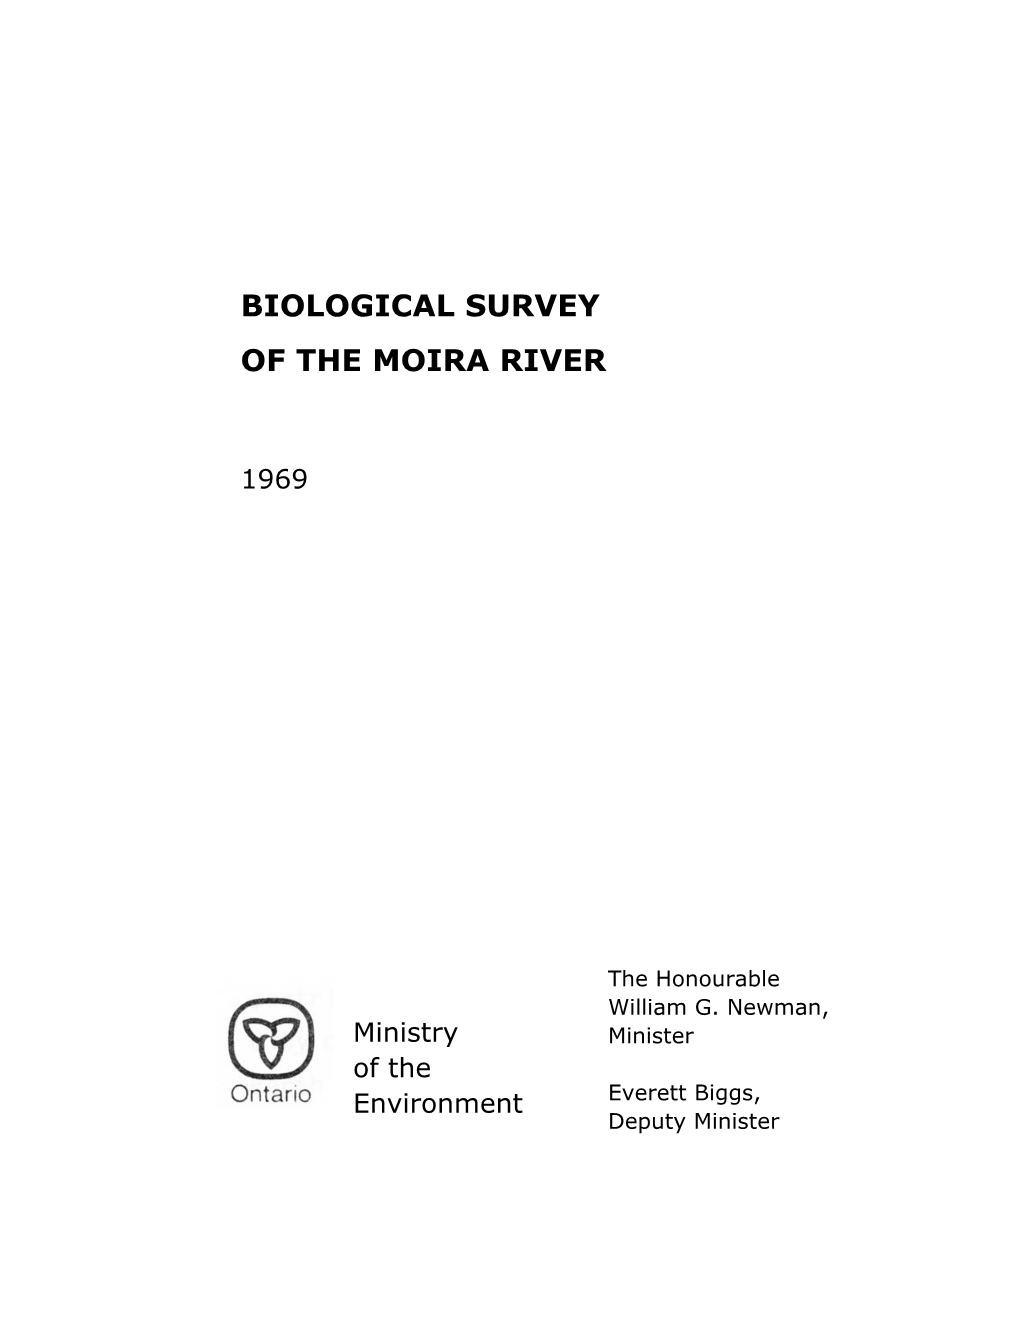 Biological Survey of the Moira River. 1969